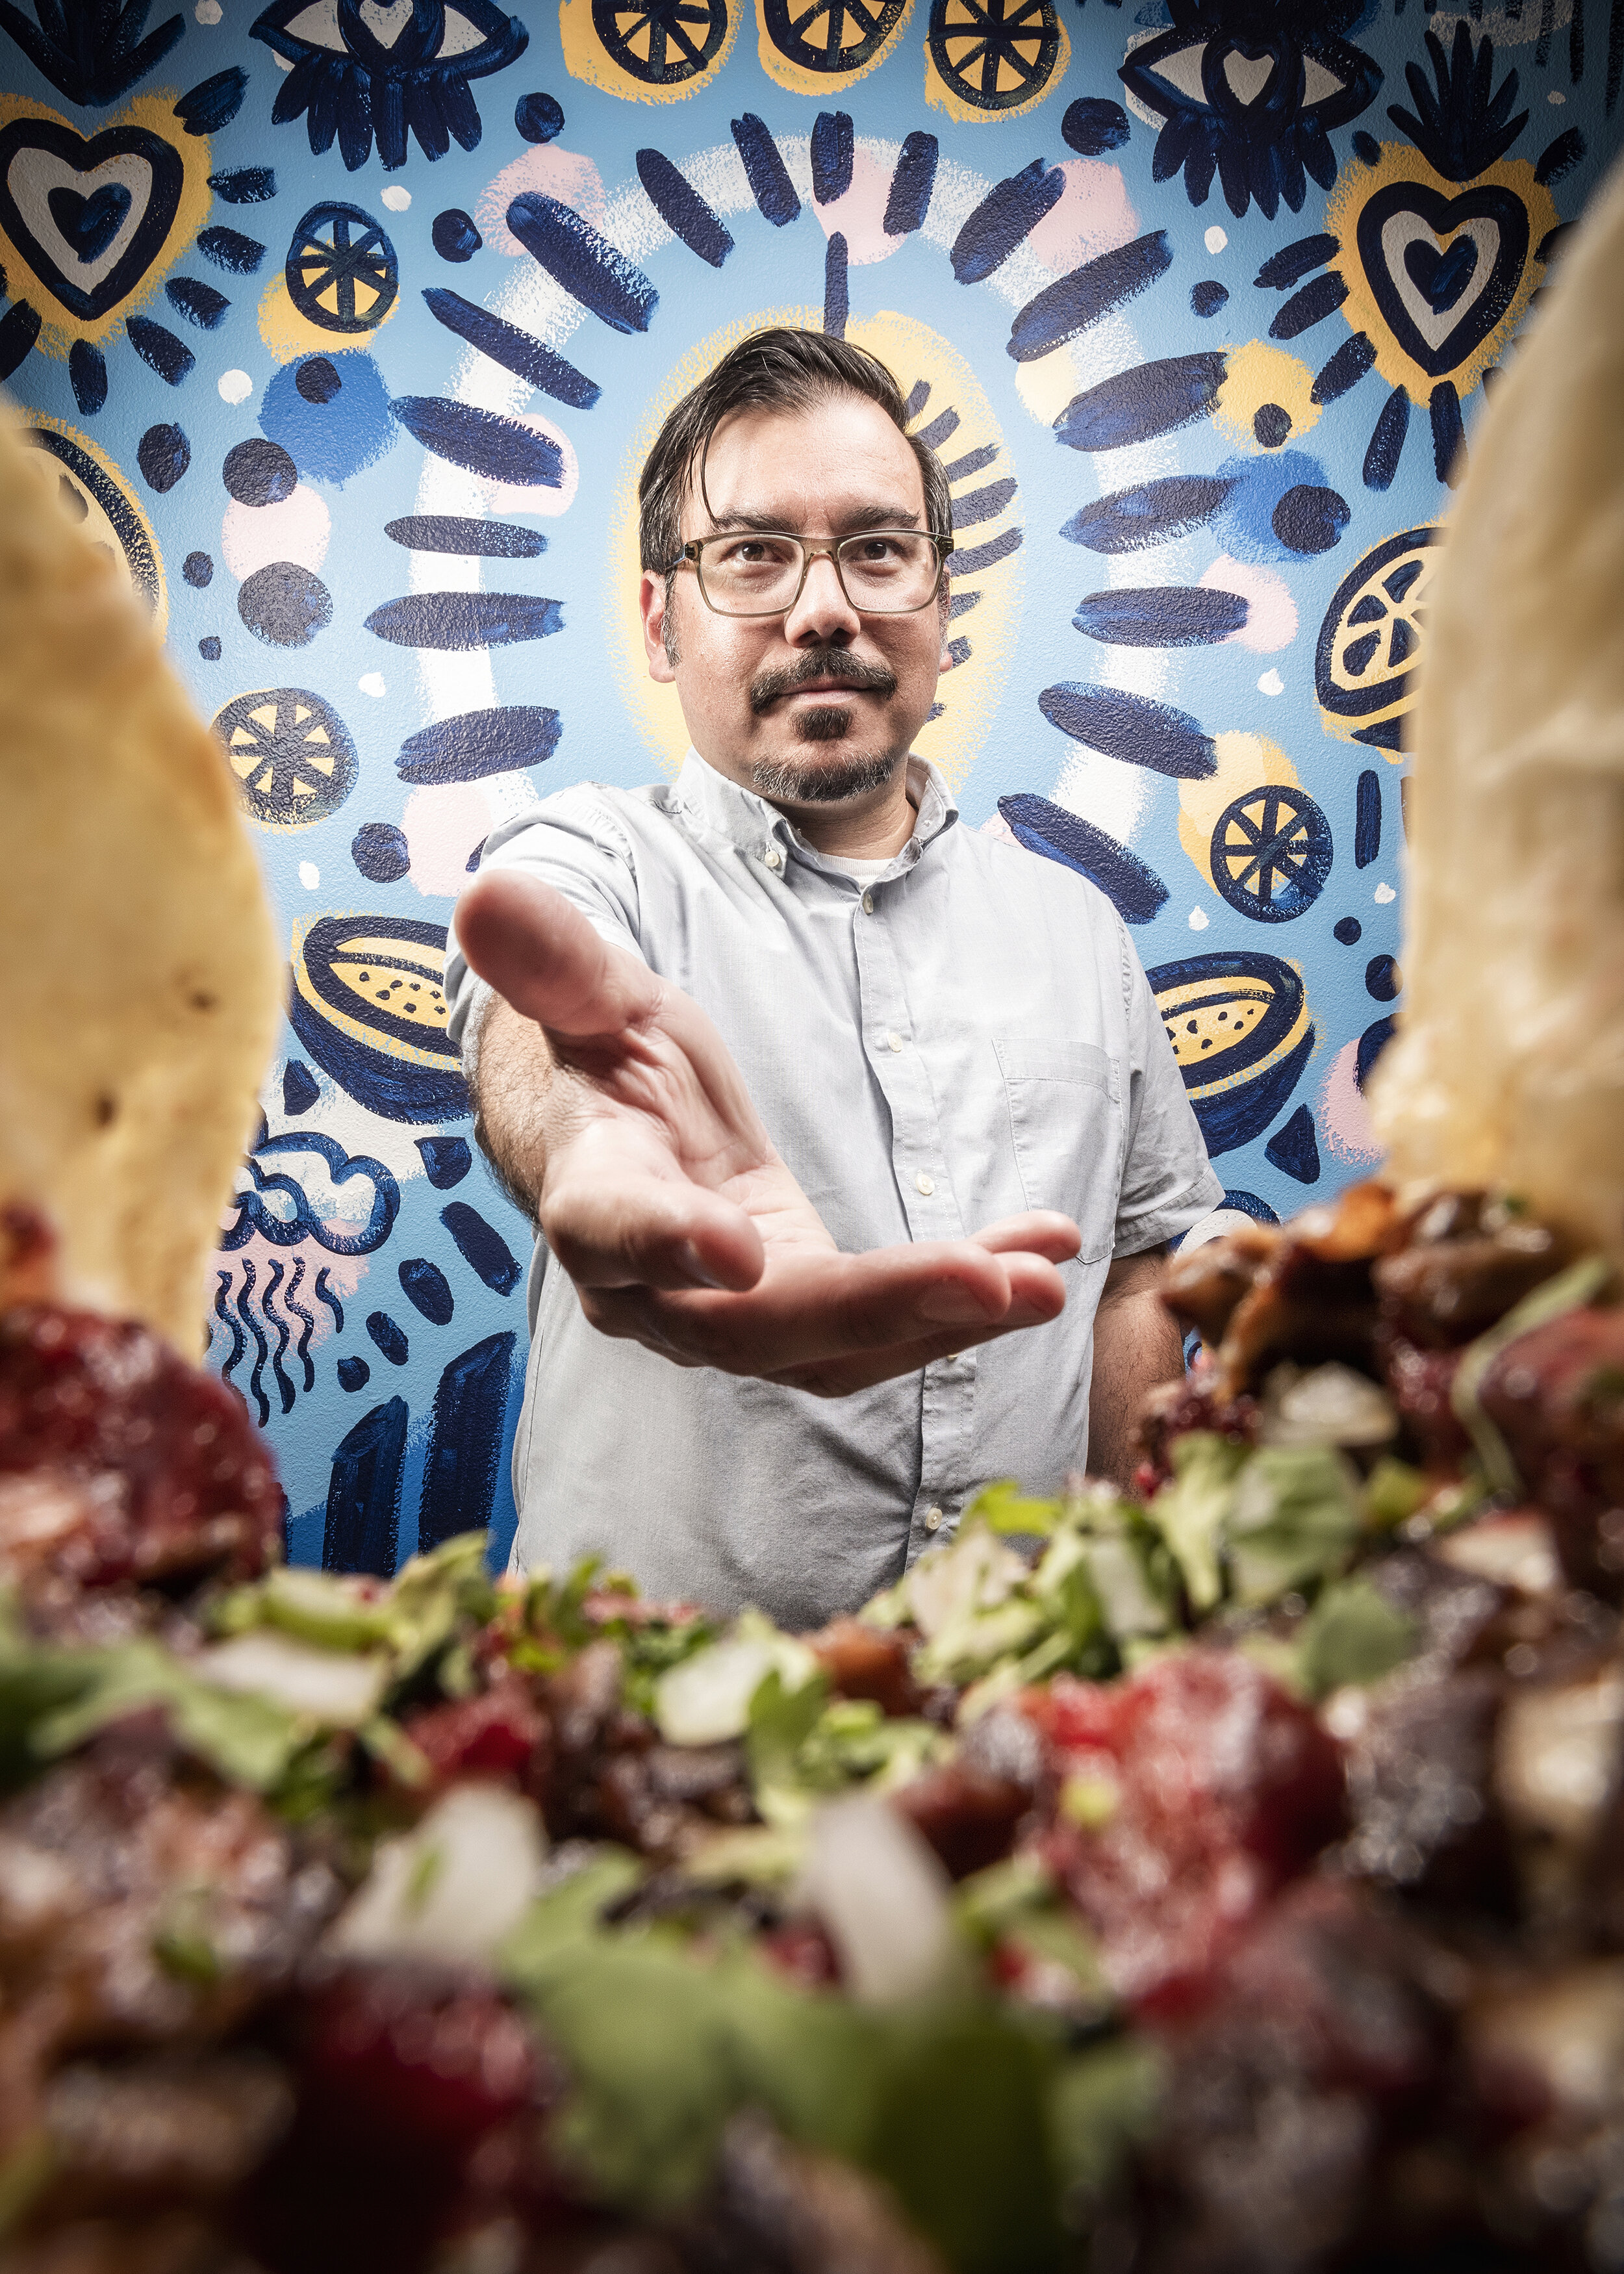  José R. Ralat, a Dallas, TX resident and professional taco connoisseur, took a job as Texas Monthly Magazine’s first taco editor in 2019.  Maldonado said, “[Tacos are] essential not only to the Texas diet but also to the Texas identity, and that’s j